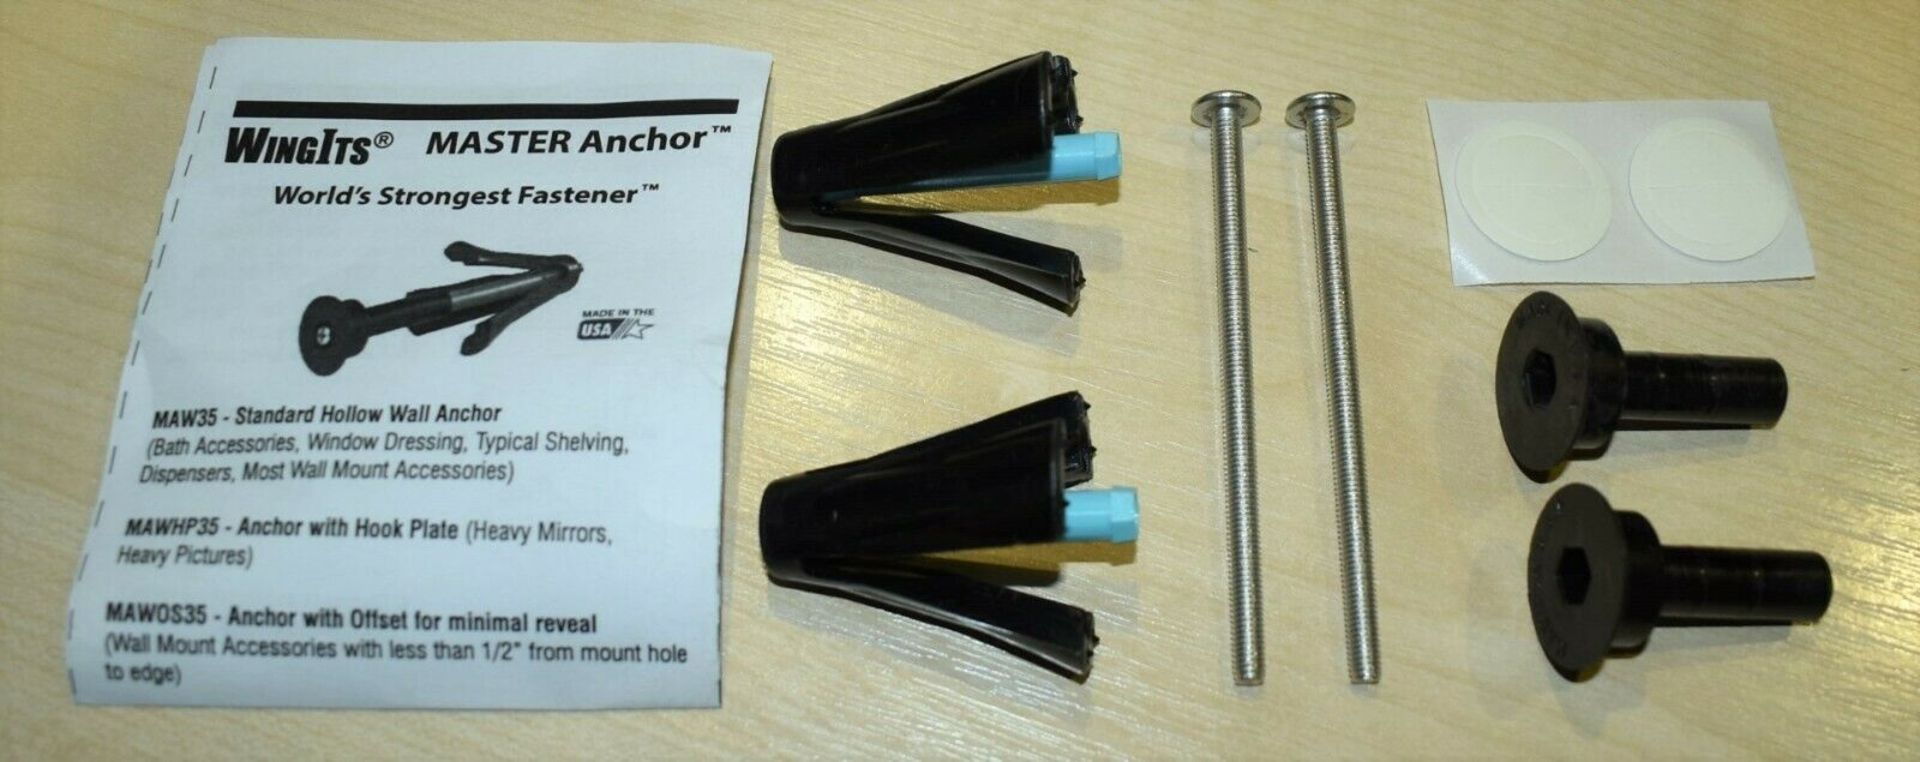 400 x Packs of WingIts Master Anchor Super Duty With Offset Drywall Fasteners - Brand New Stock - - Image 3 of 6